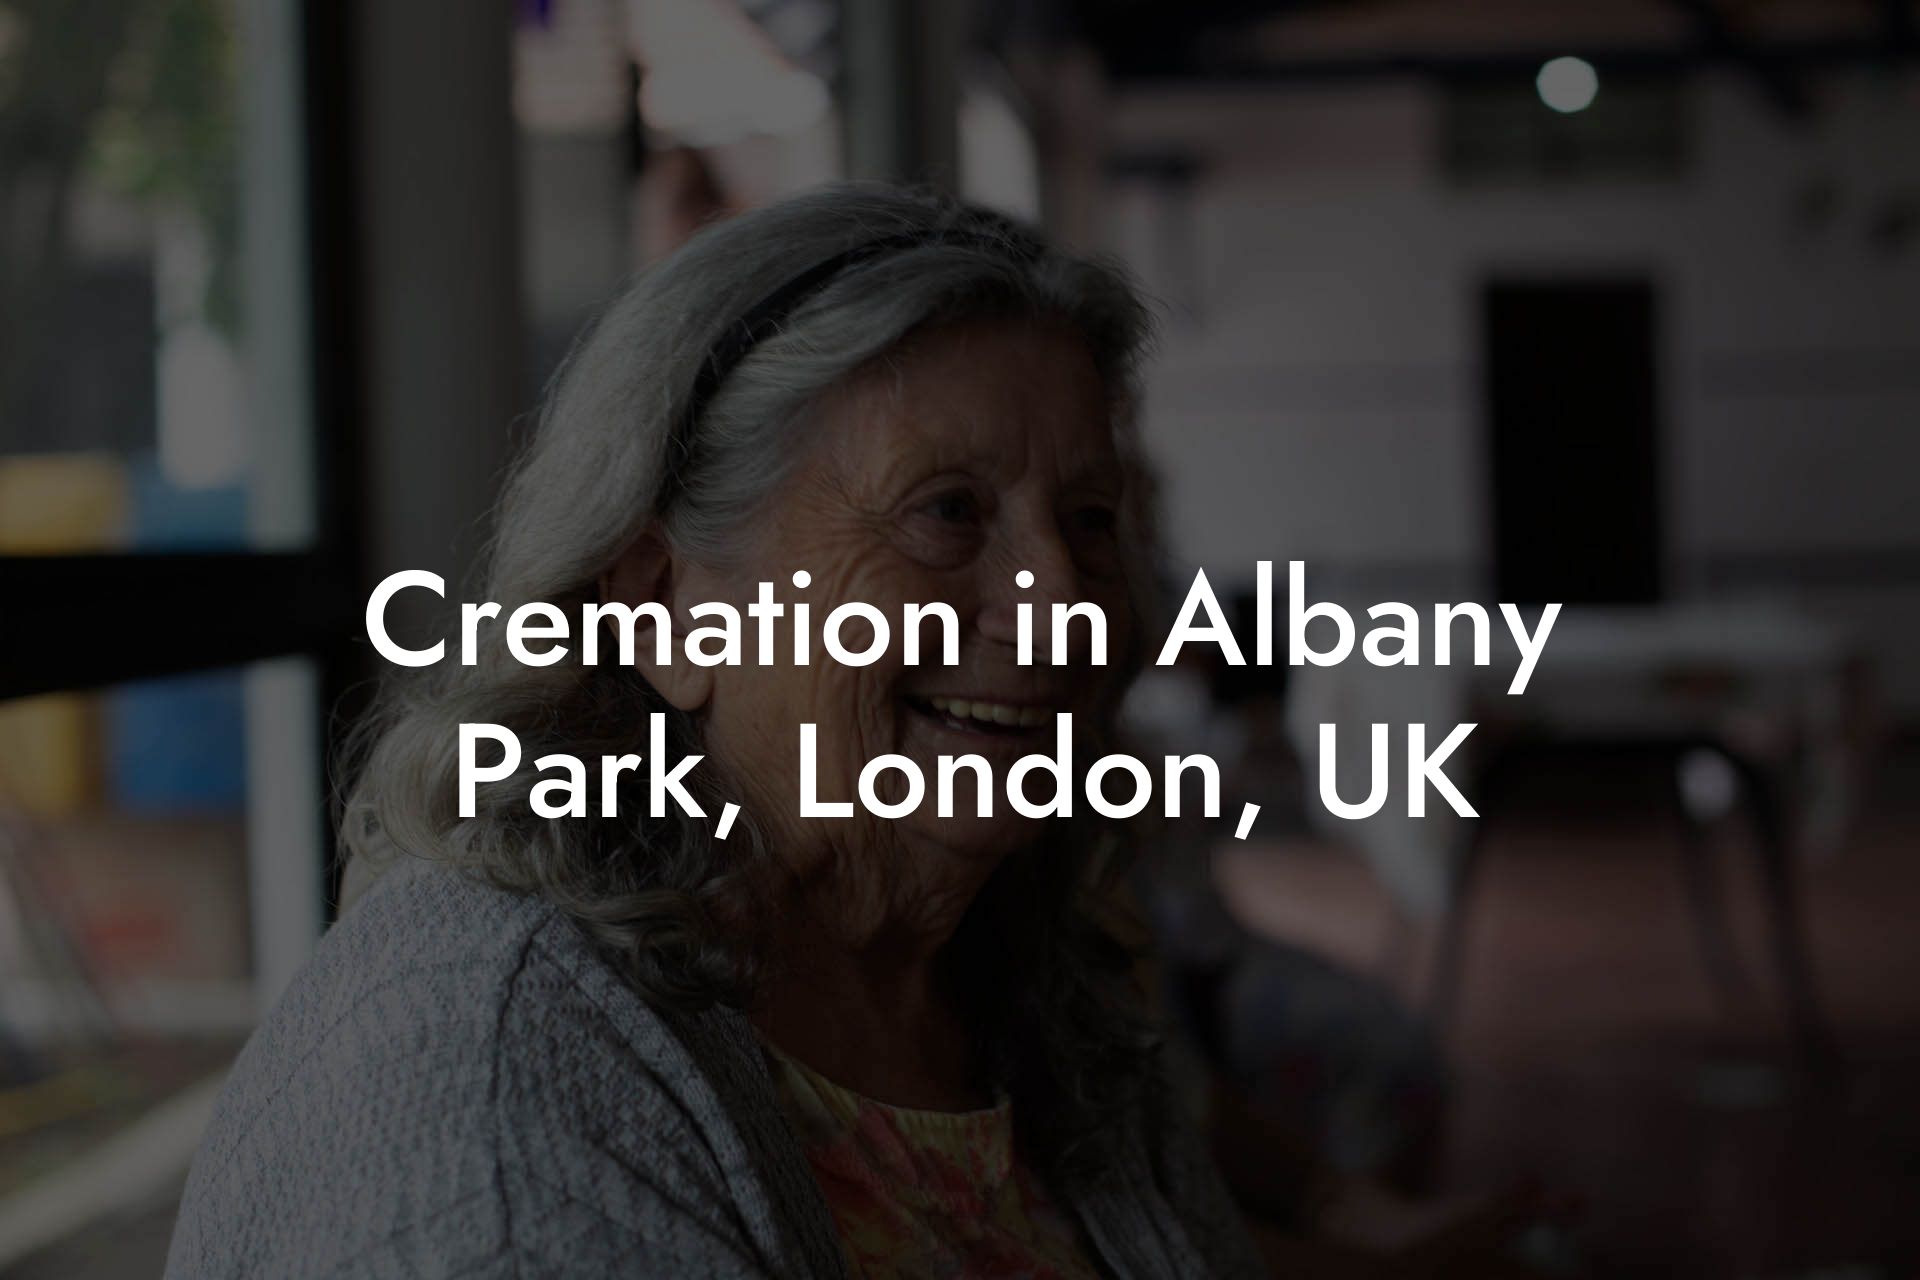 Cremation in Albany Park, London, UK